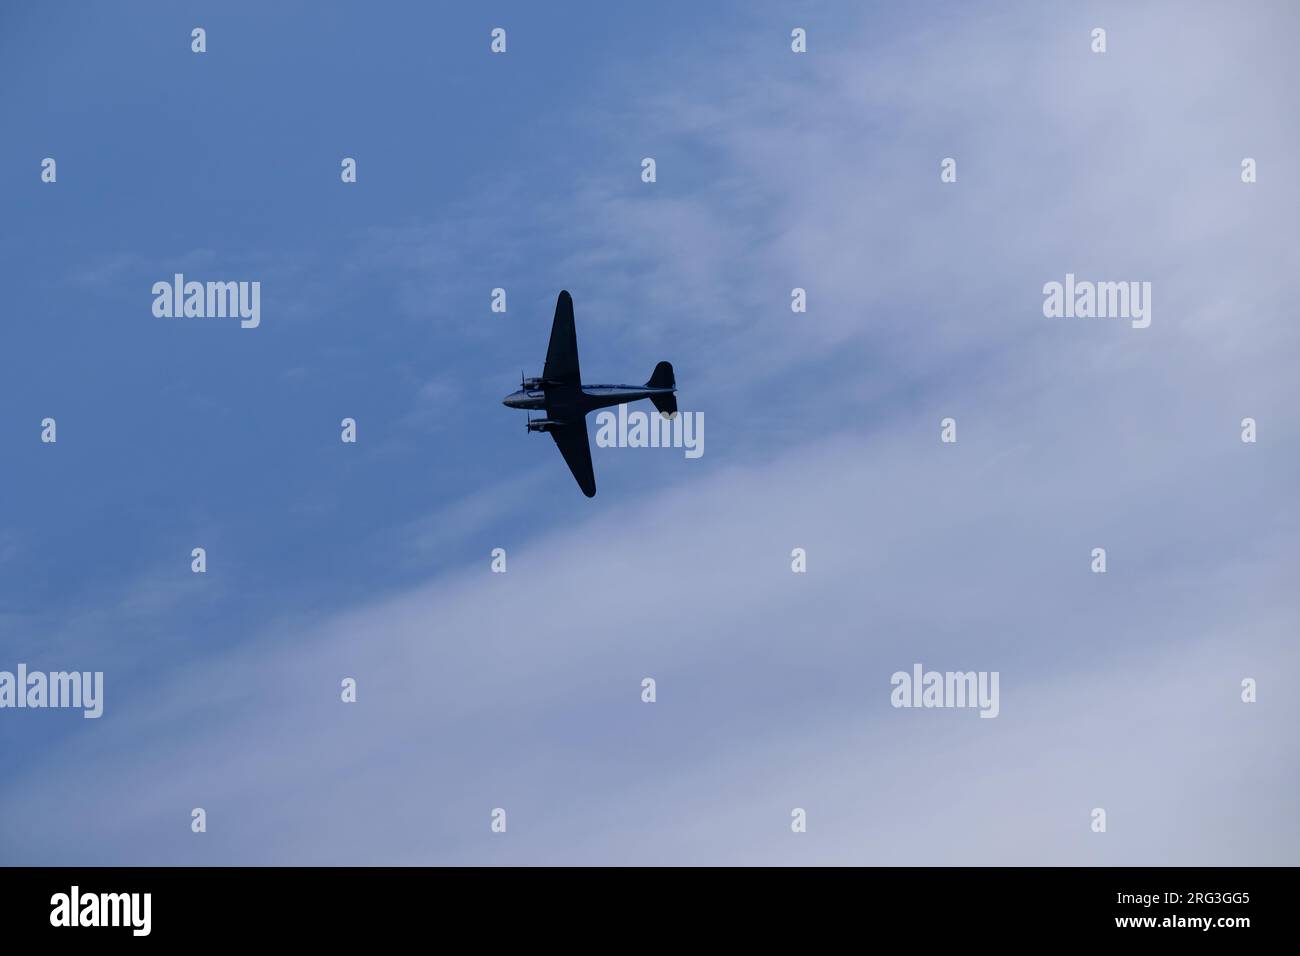 Helsinki / Finland - JULY 28, 2023. An old propeller passenger airplane flying against a cloudy morning sky. Stock Photo